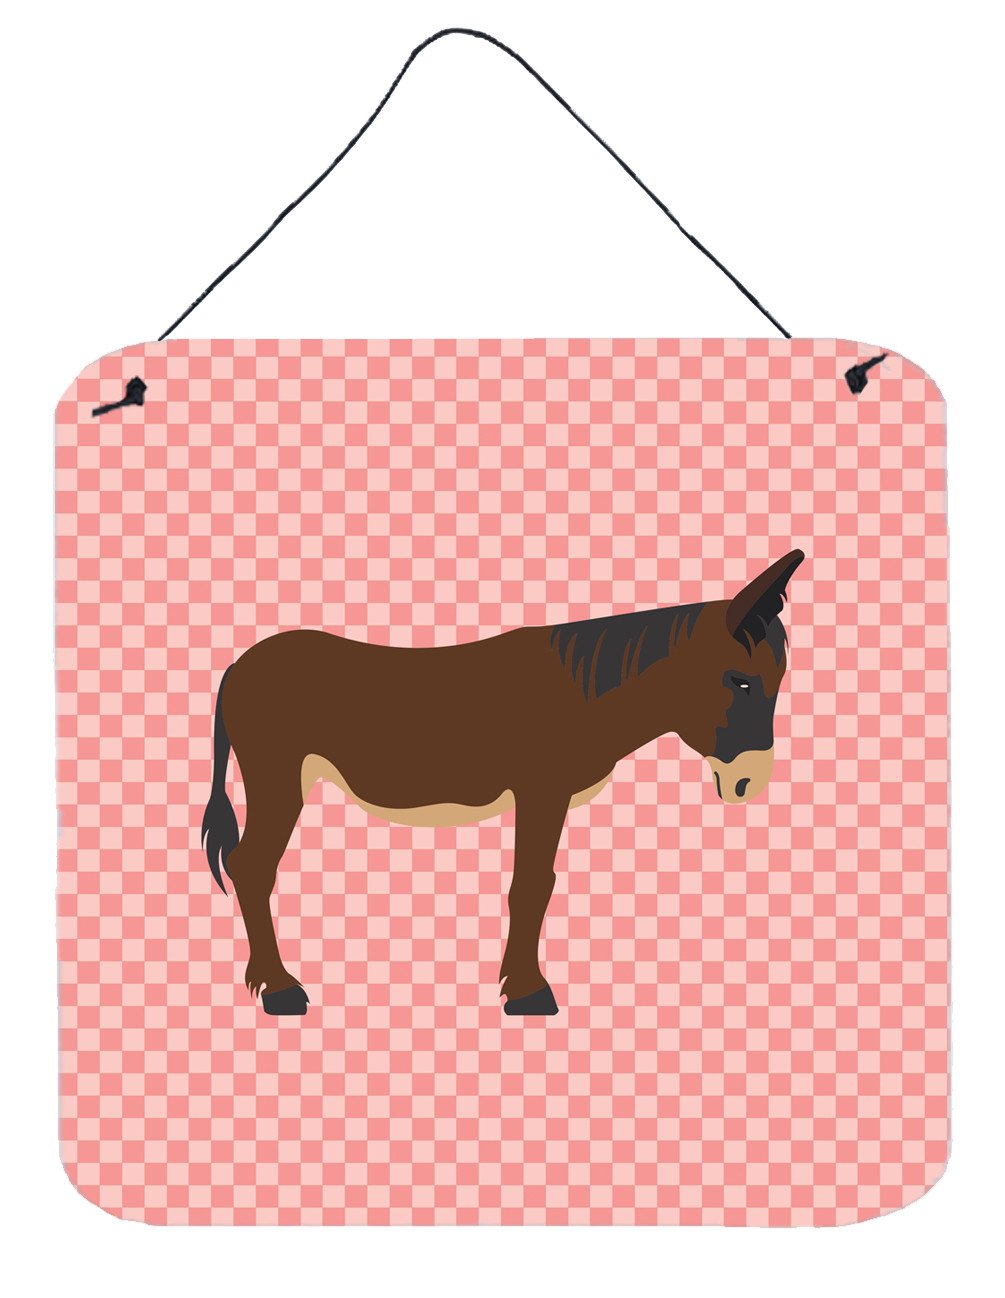 Zamorano-Leones Donkey Pink Check Wall or Door Hanging Prints BB7853DS66 by Caroline's Treasures